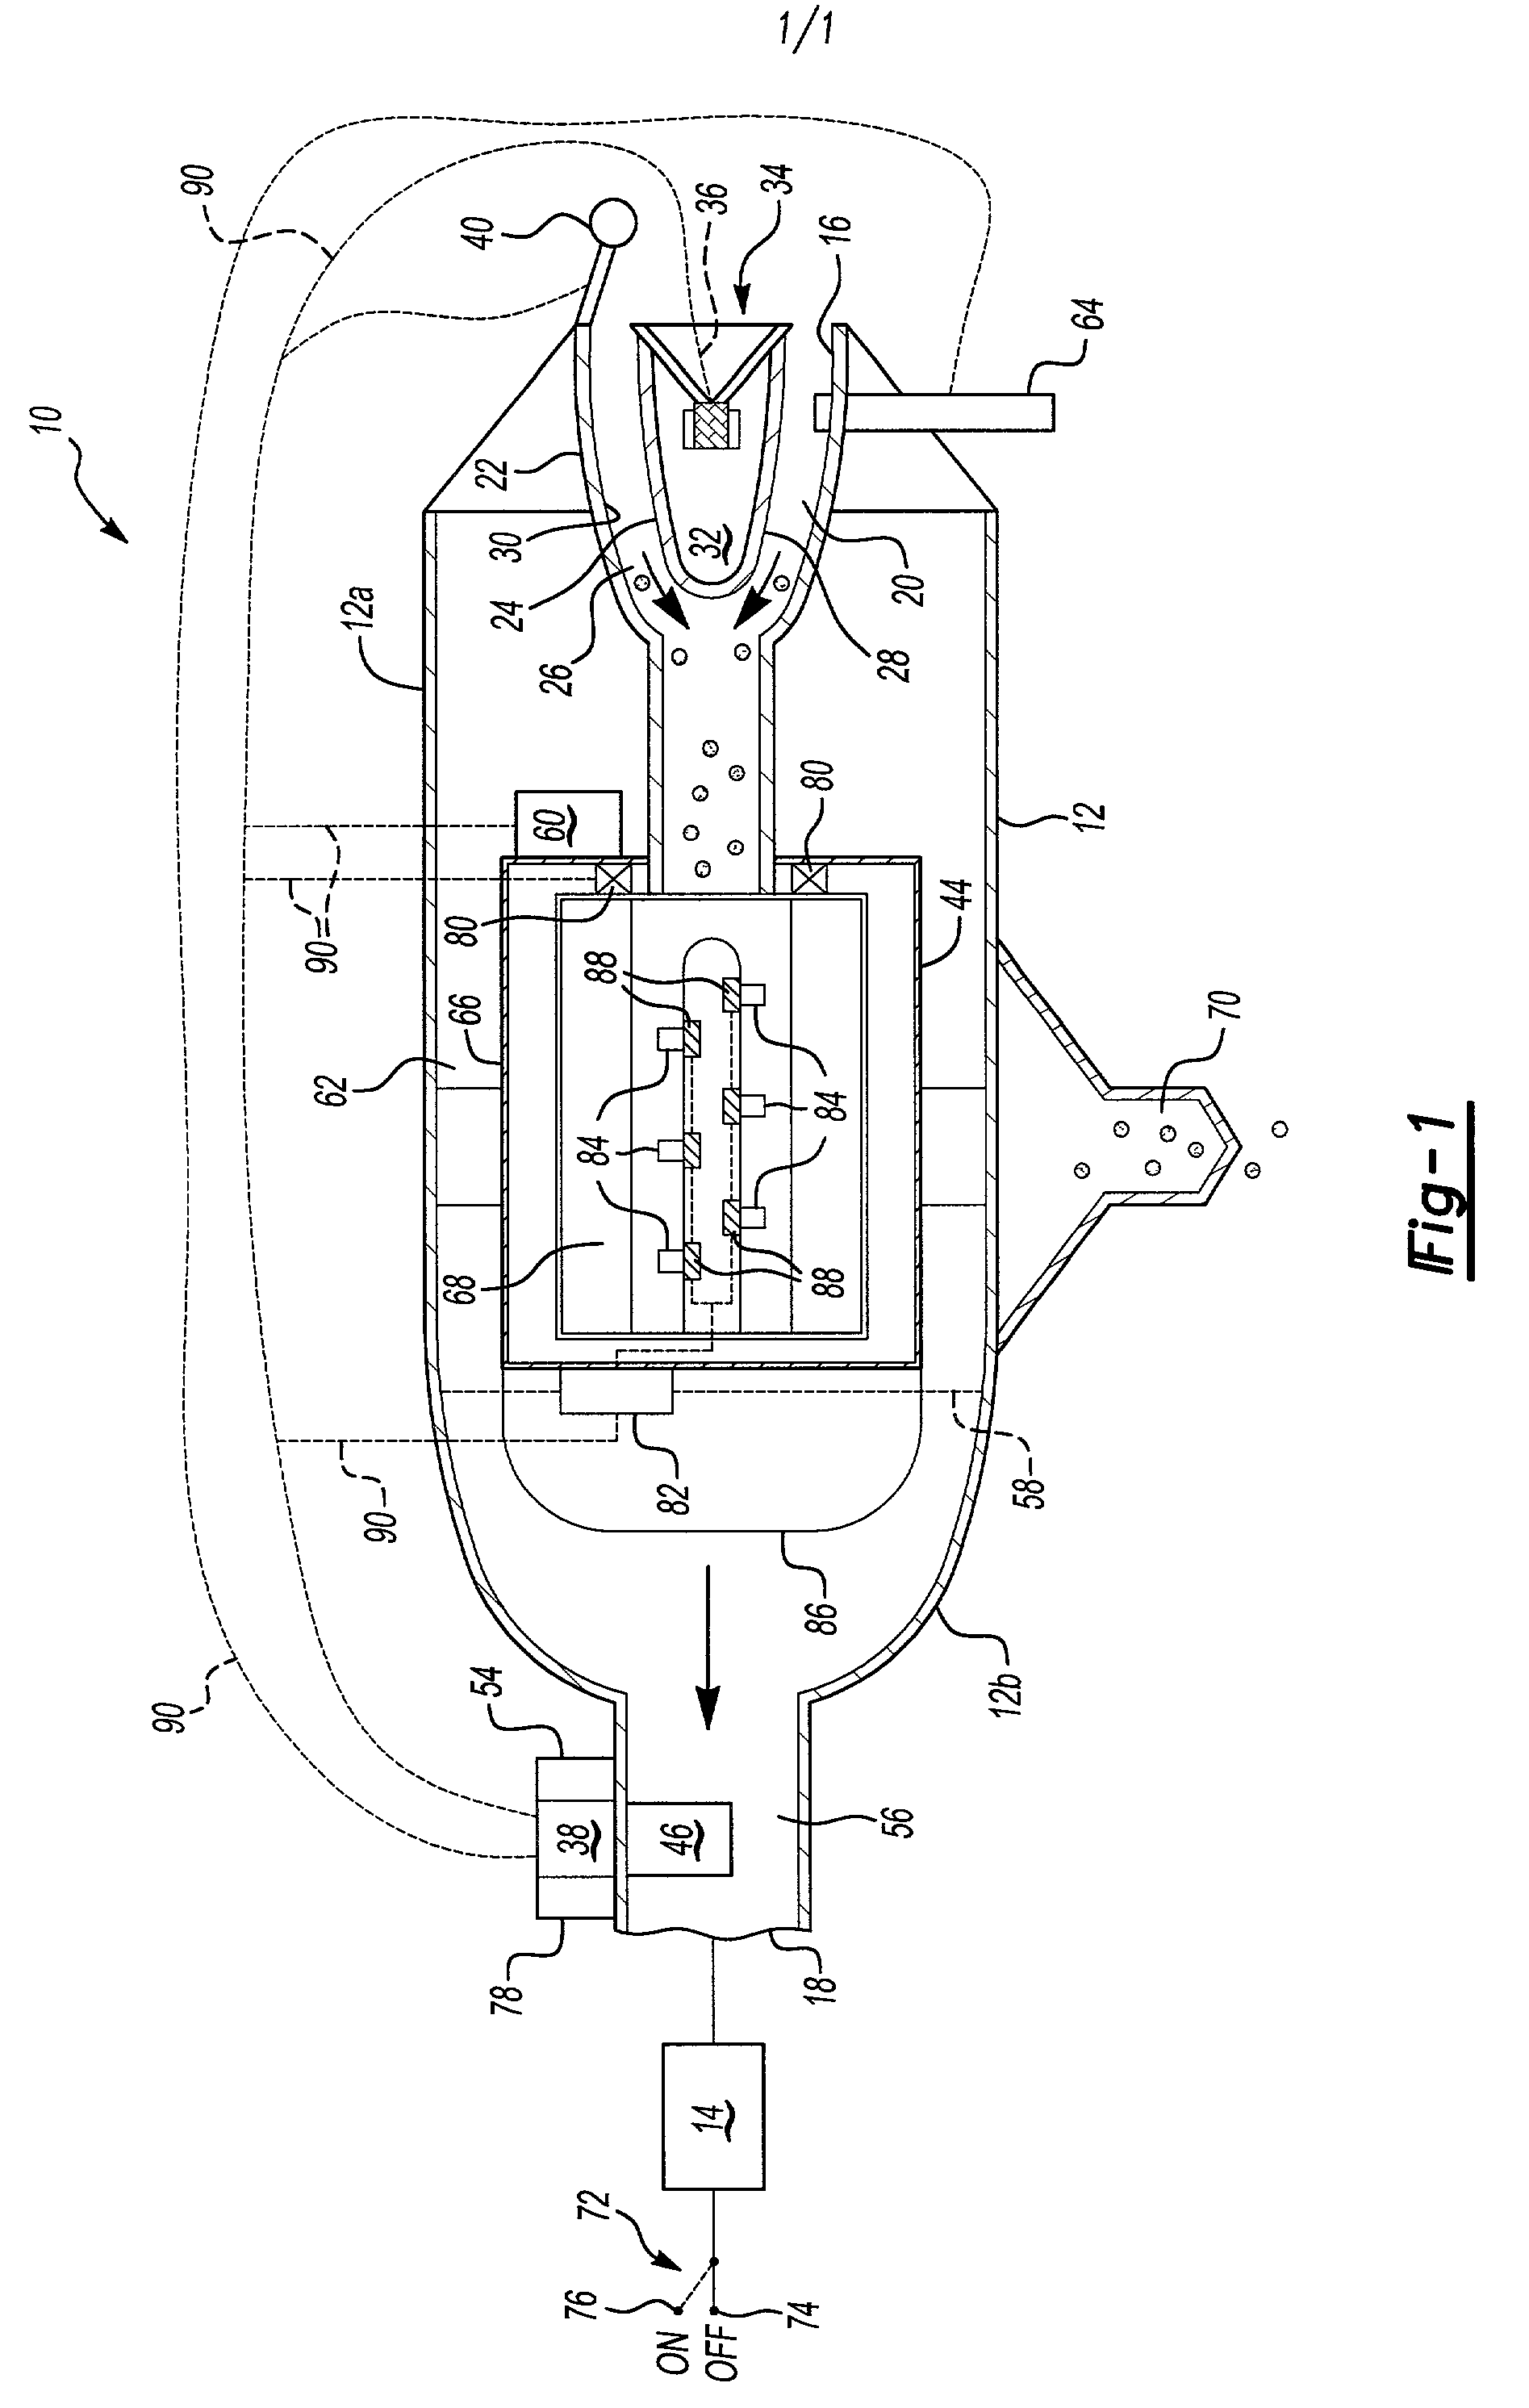 Integrated active noise control with self-cleaning filter apparatus